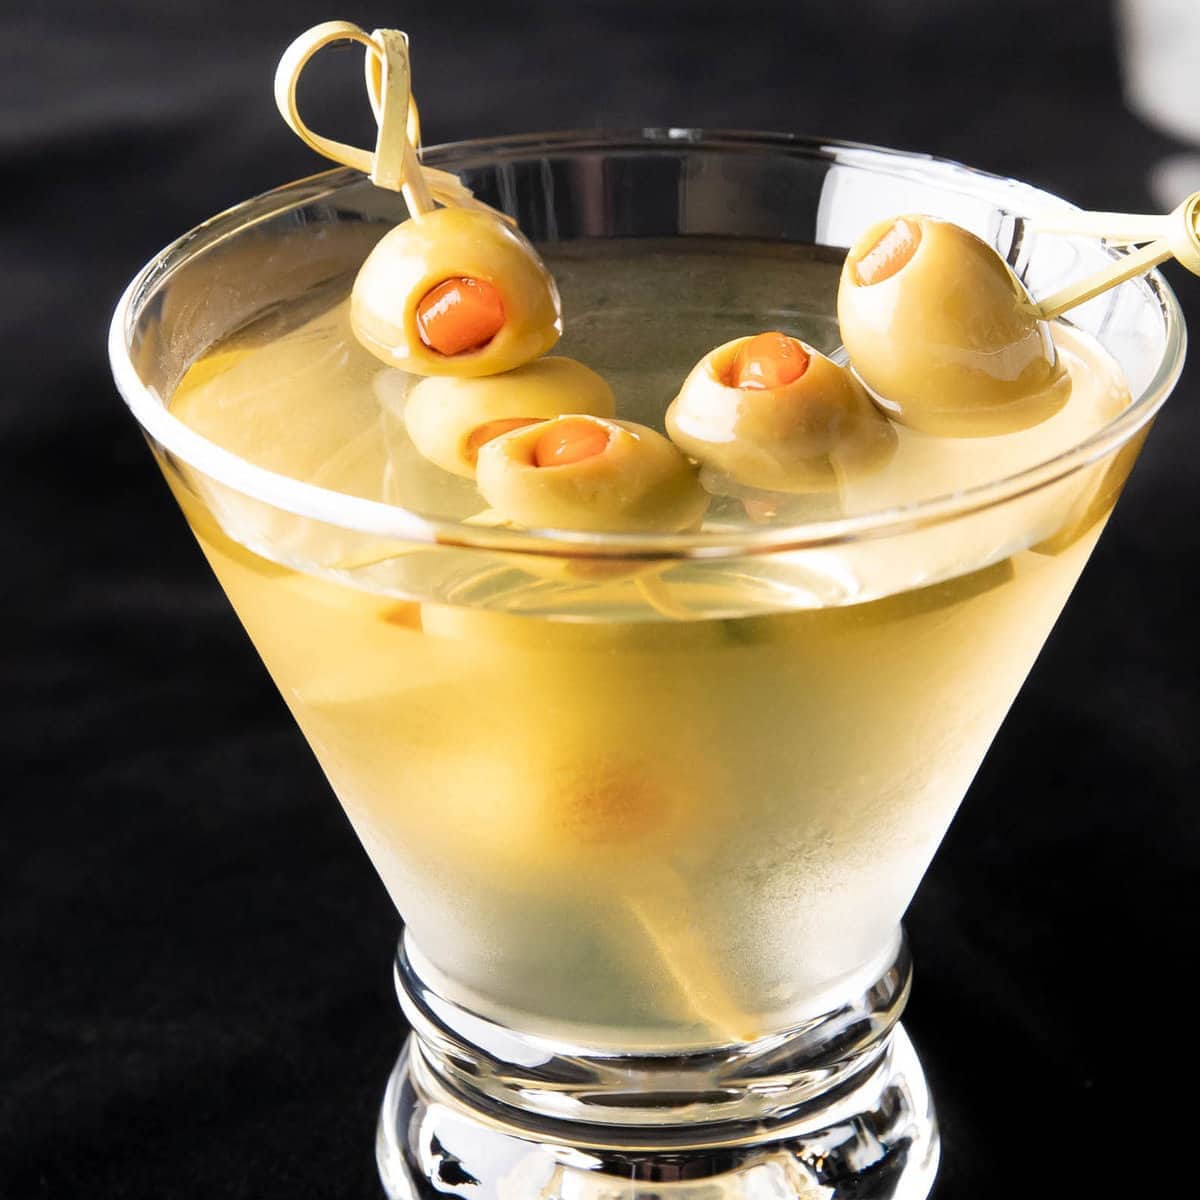 Extra Dirty Martini served in a chilled glass with two olive skewers